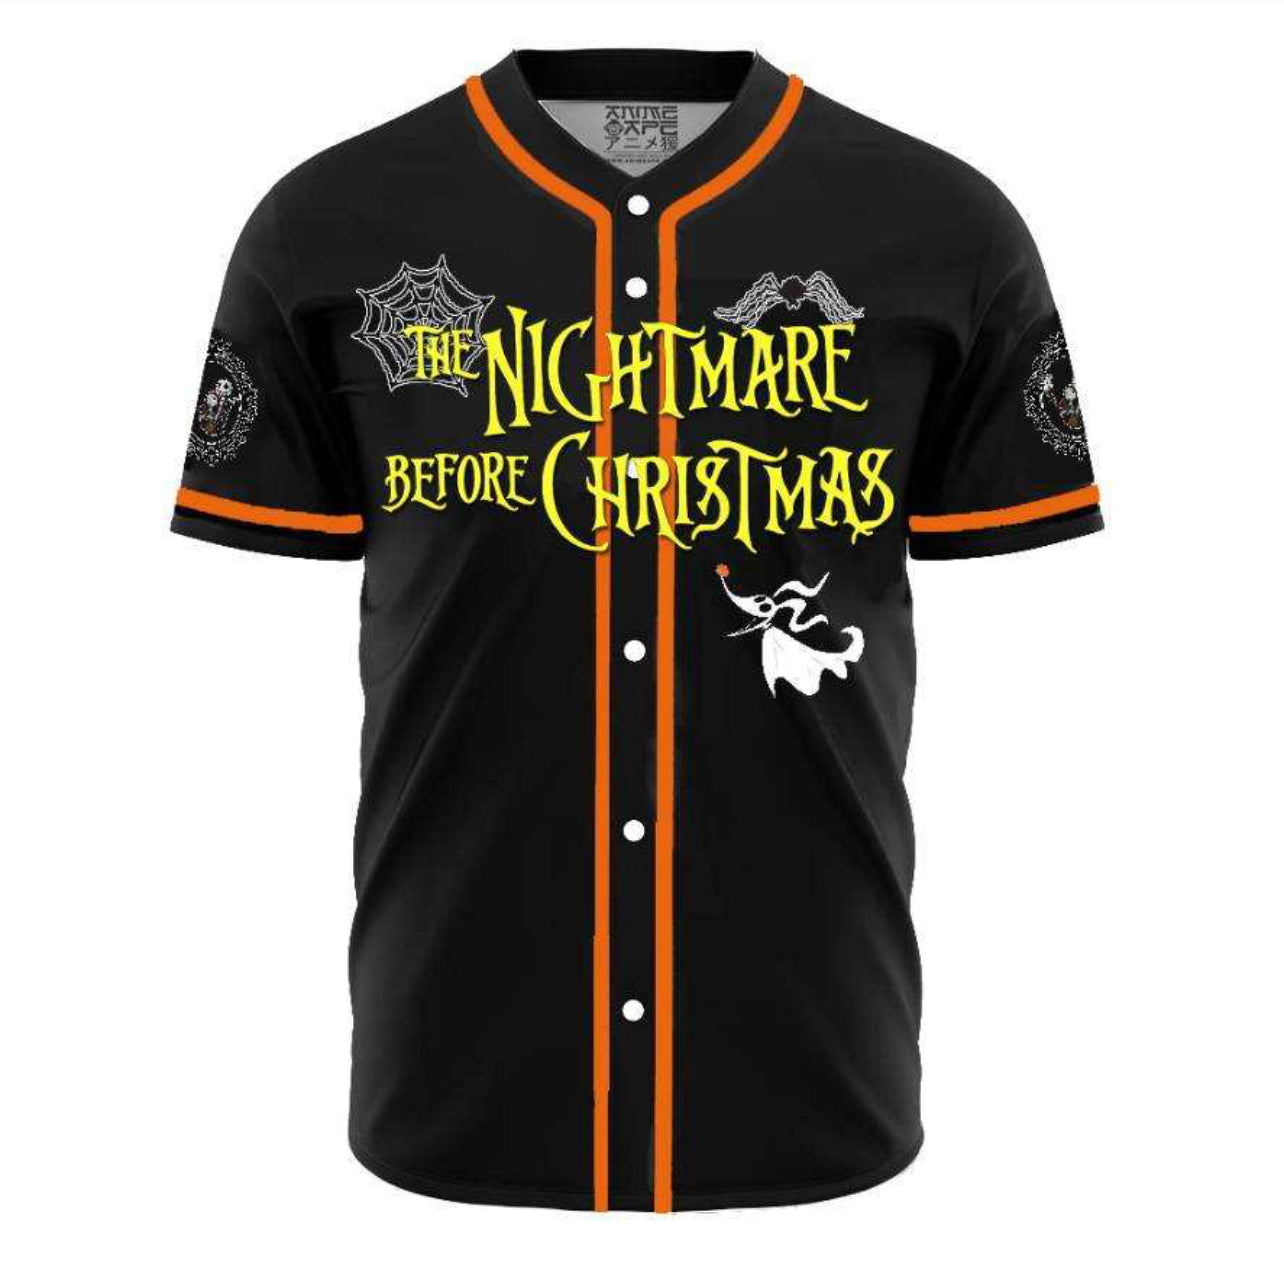 “Skelly” Nightmare Before Christmas Jersey